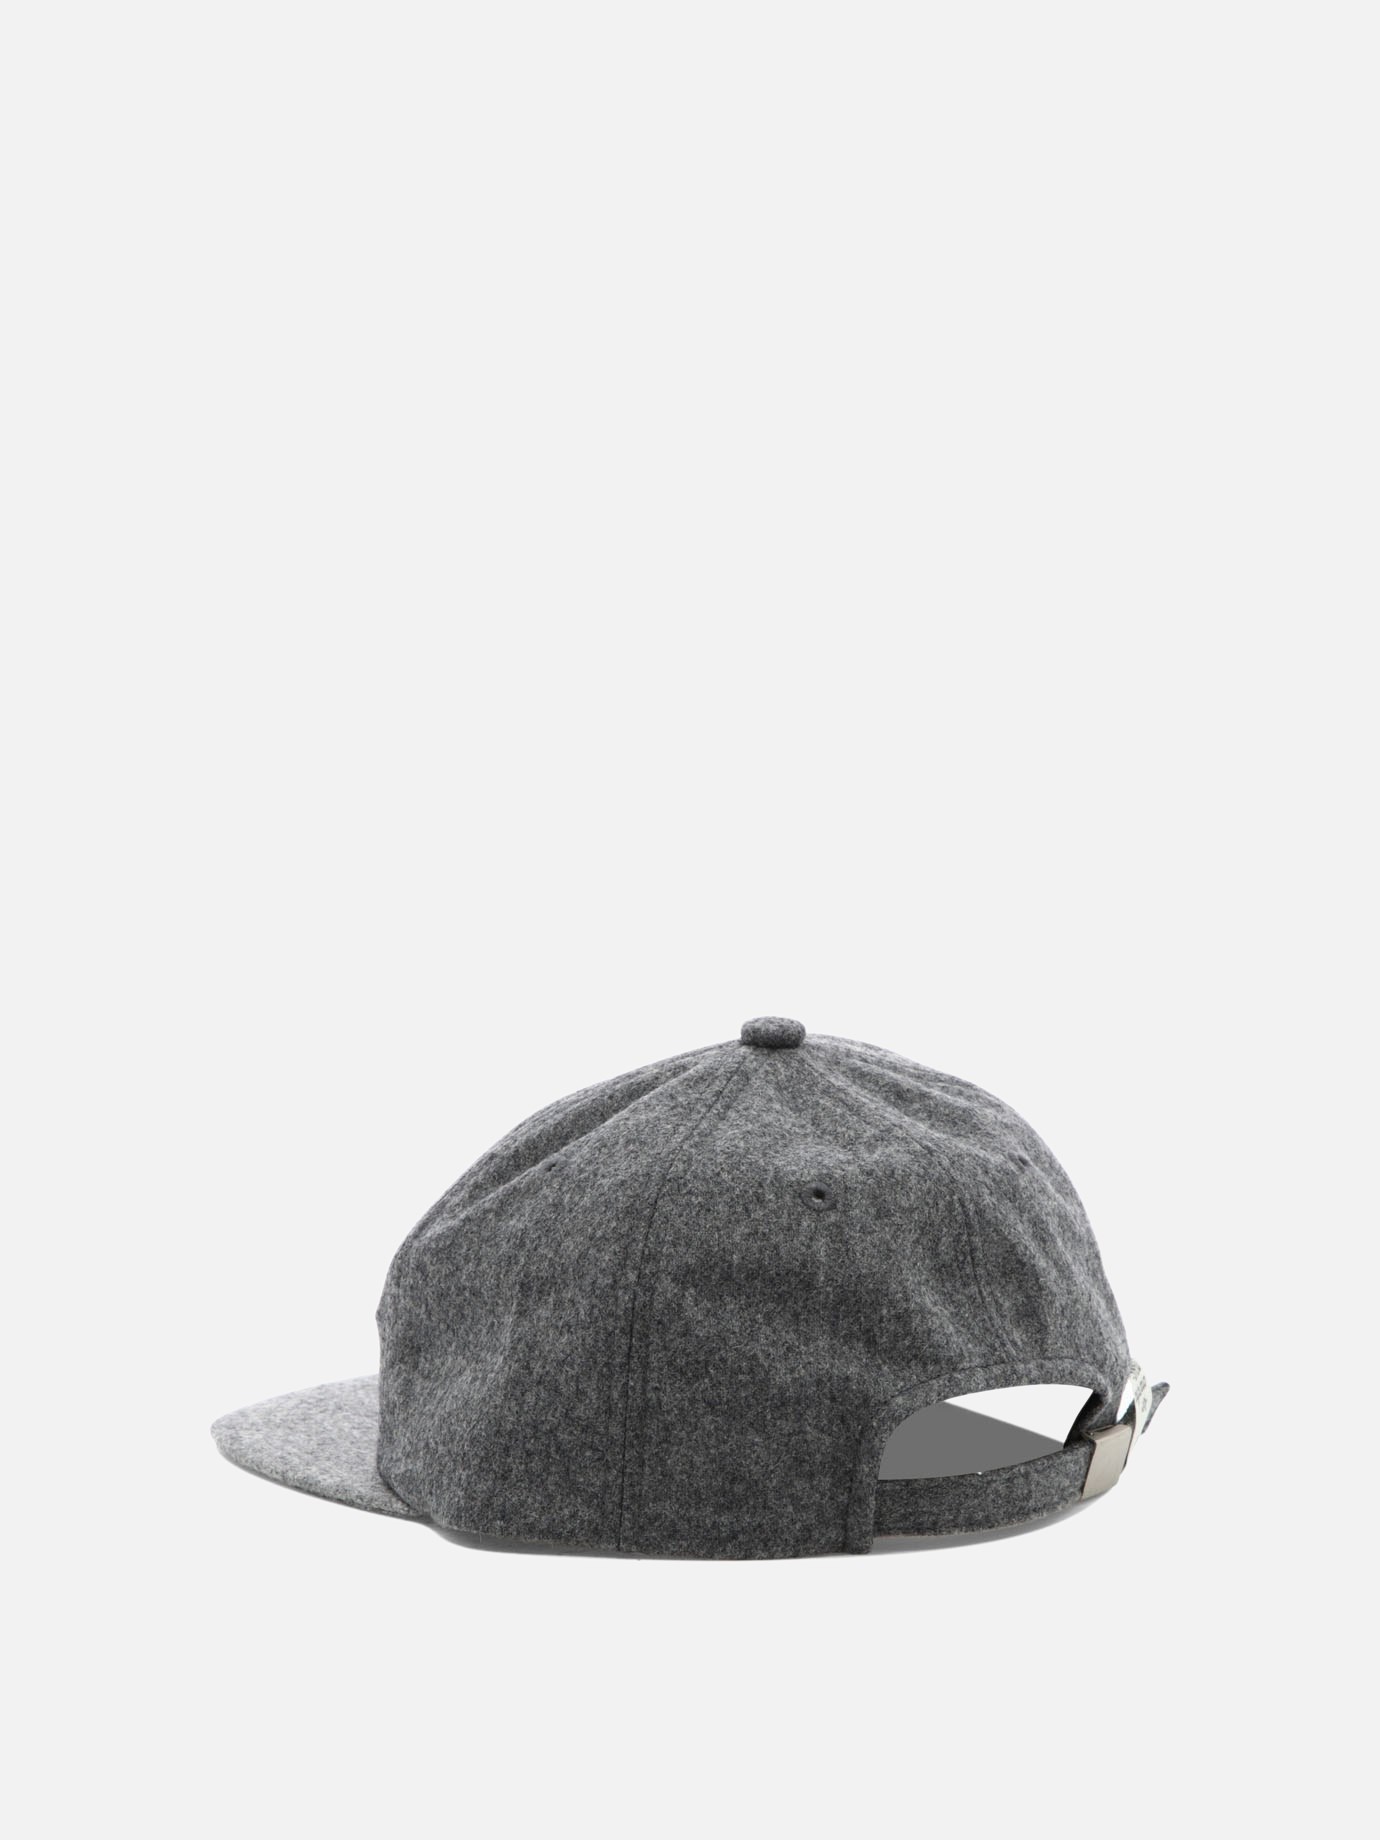 Cappello trucker  MT Cap  by Mountain Research